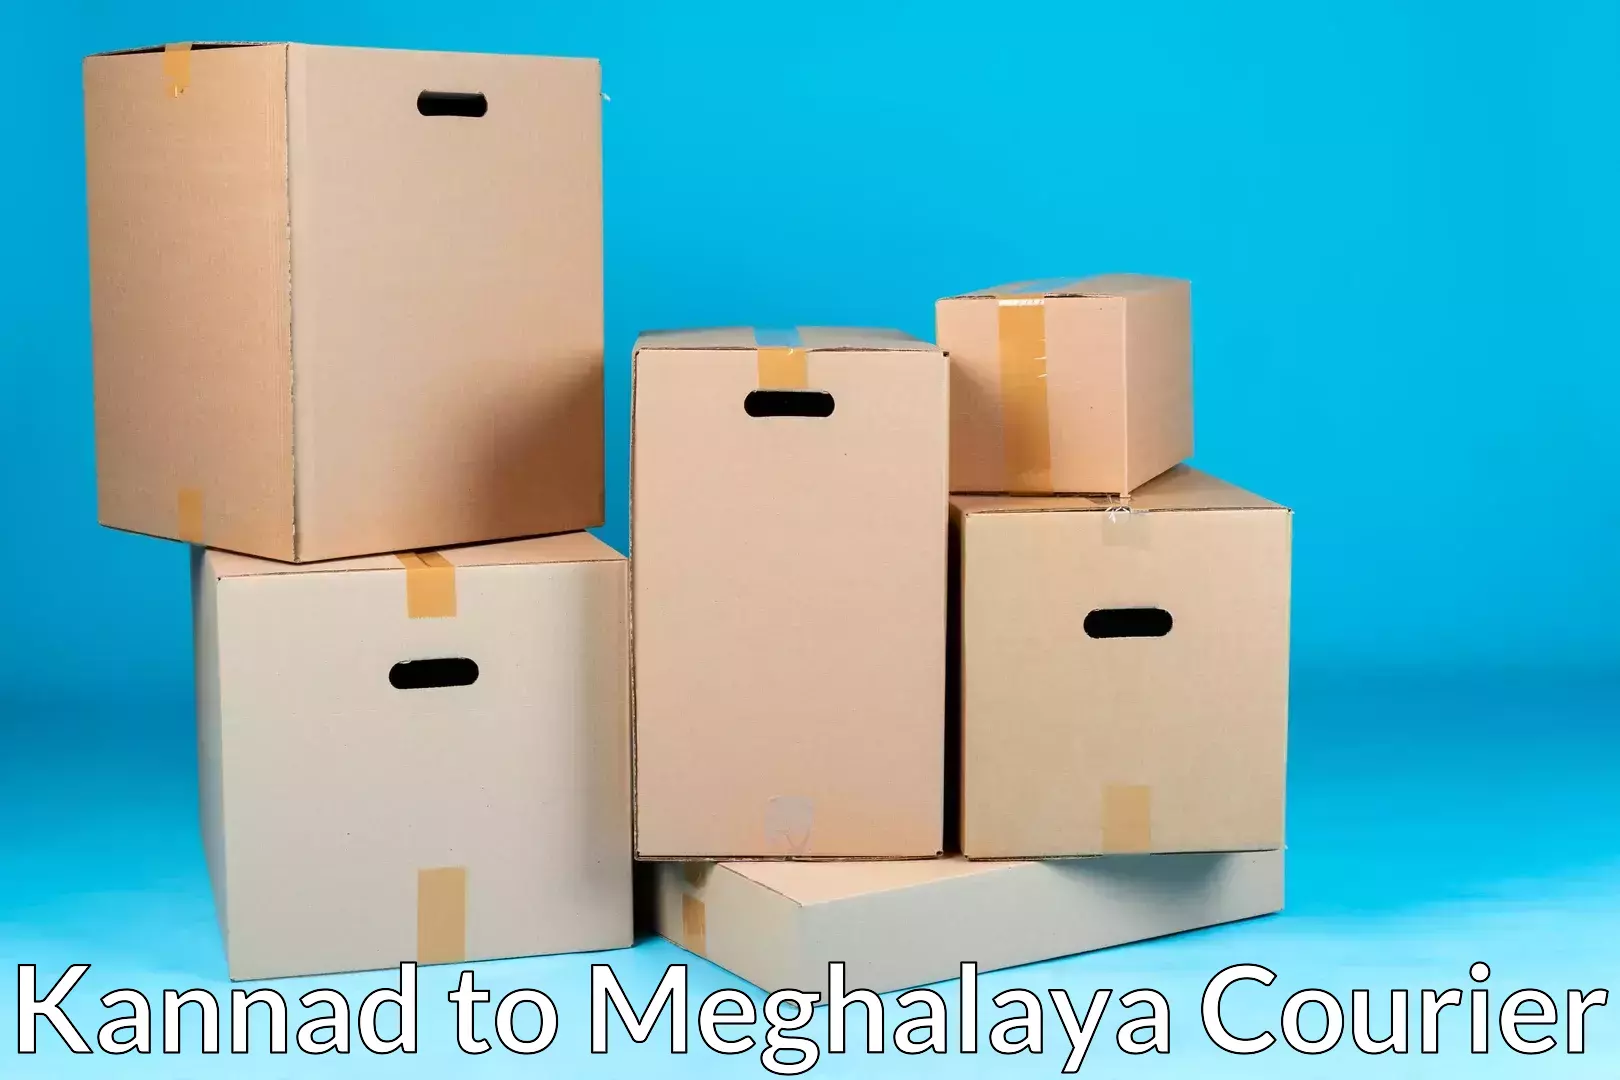 Cost-effective moving options Kannad to Shillong